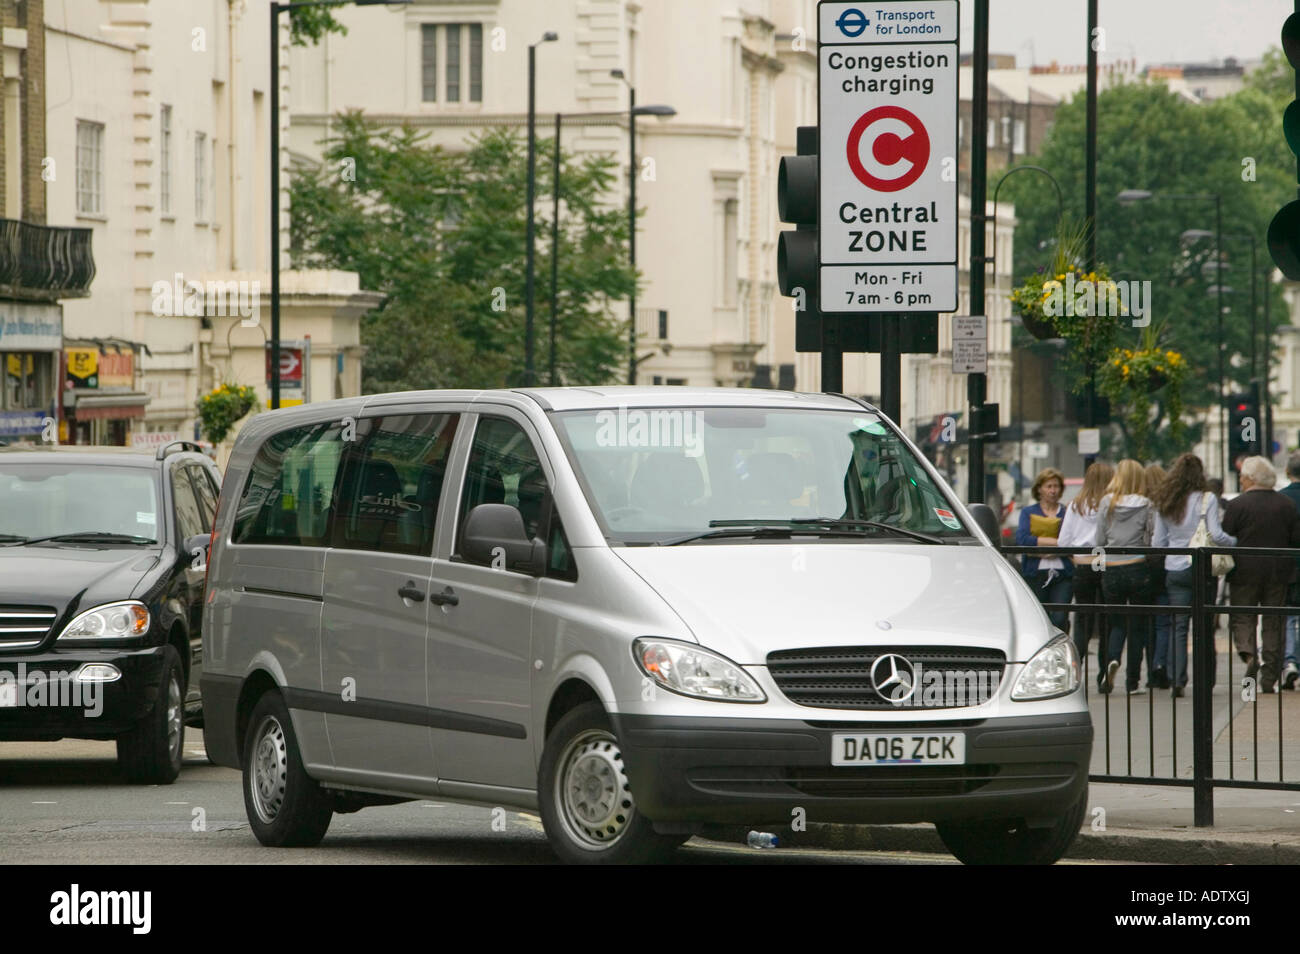 A people carrier or SUV in central London UK Stock Photo